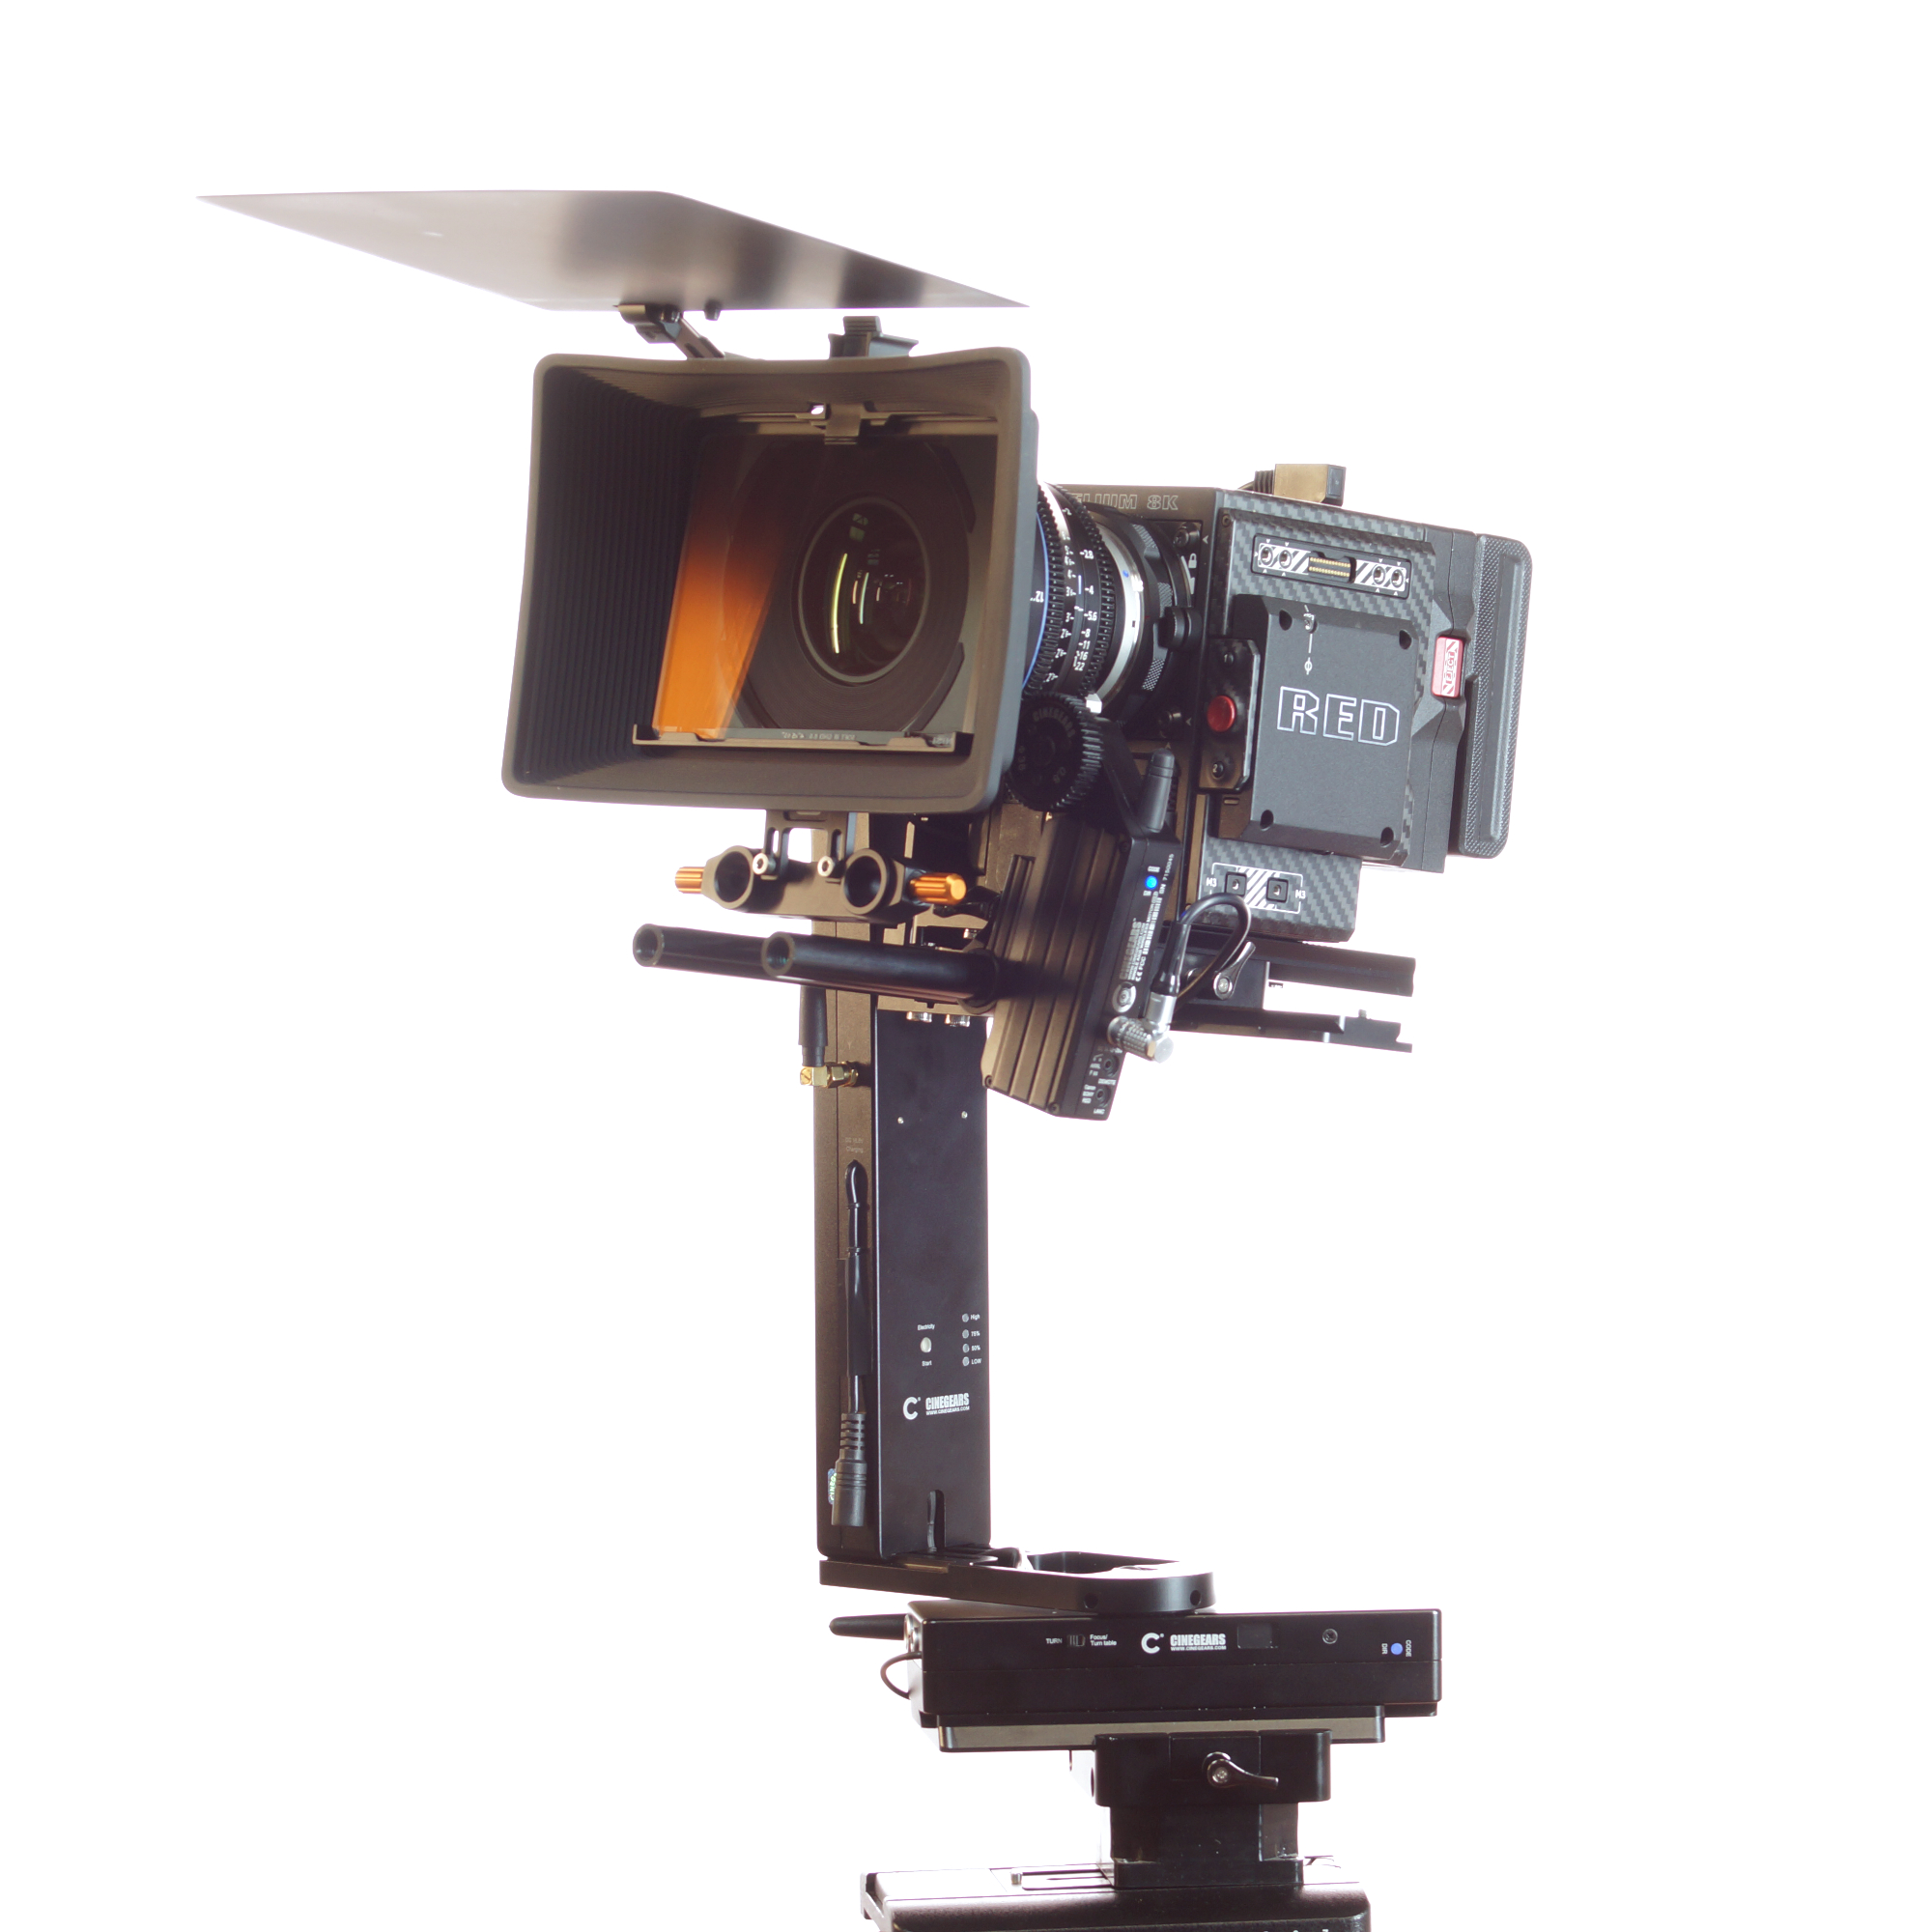 Pursuit Systems – Specialty Dynamic Film Equipment